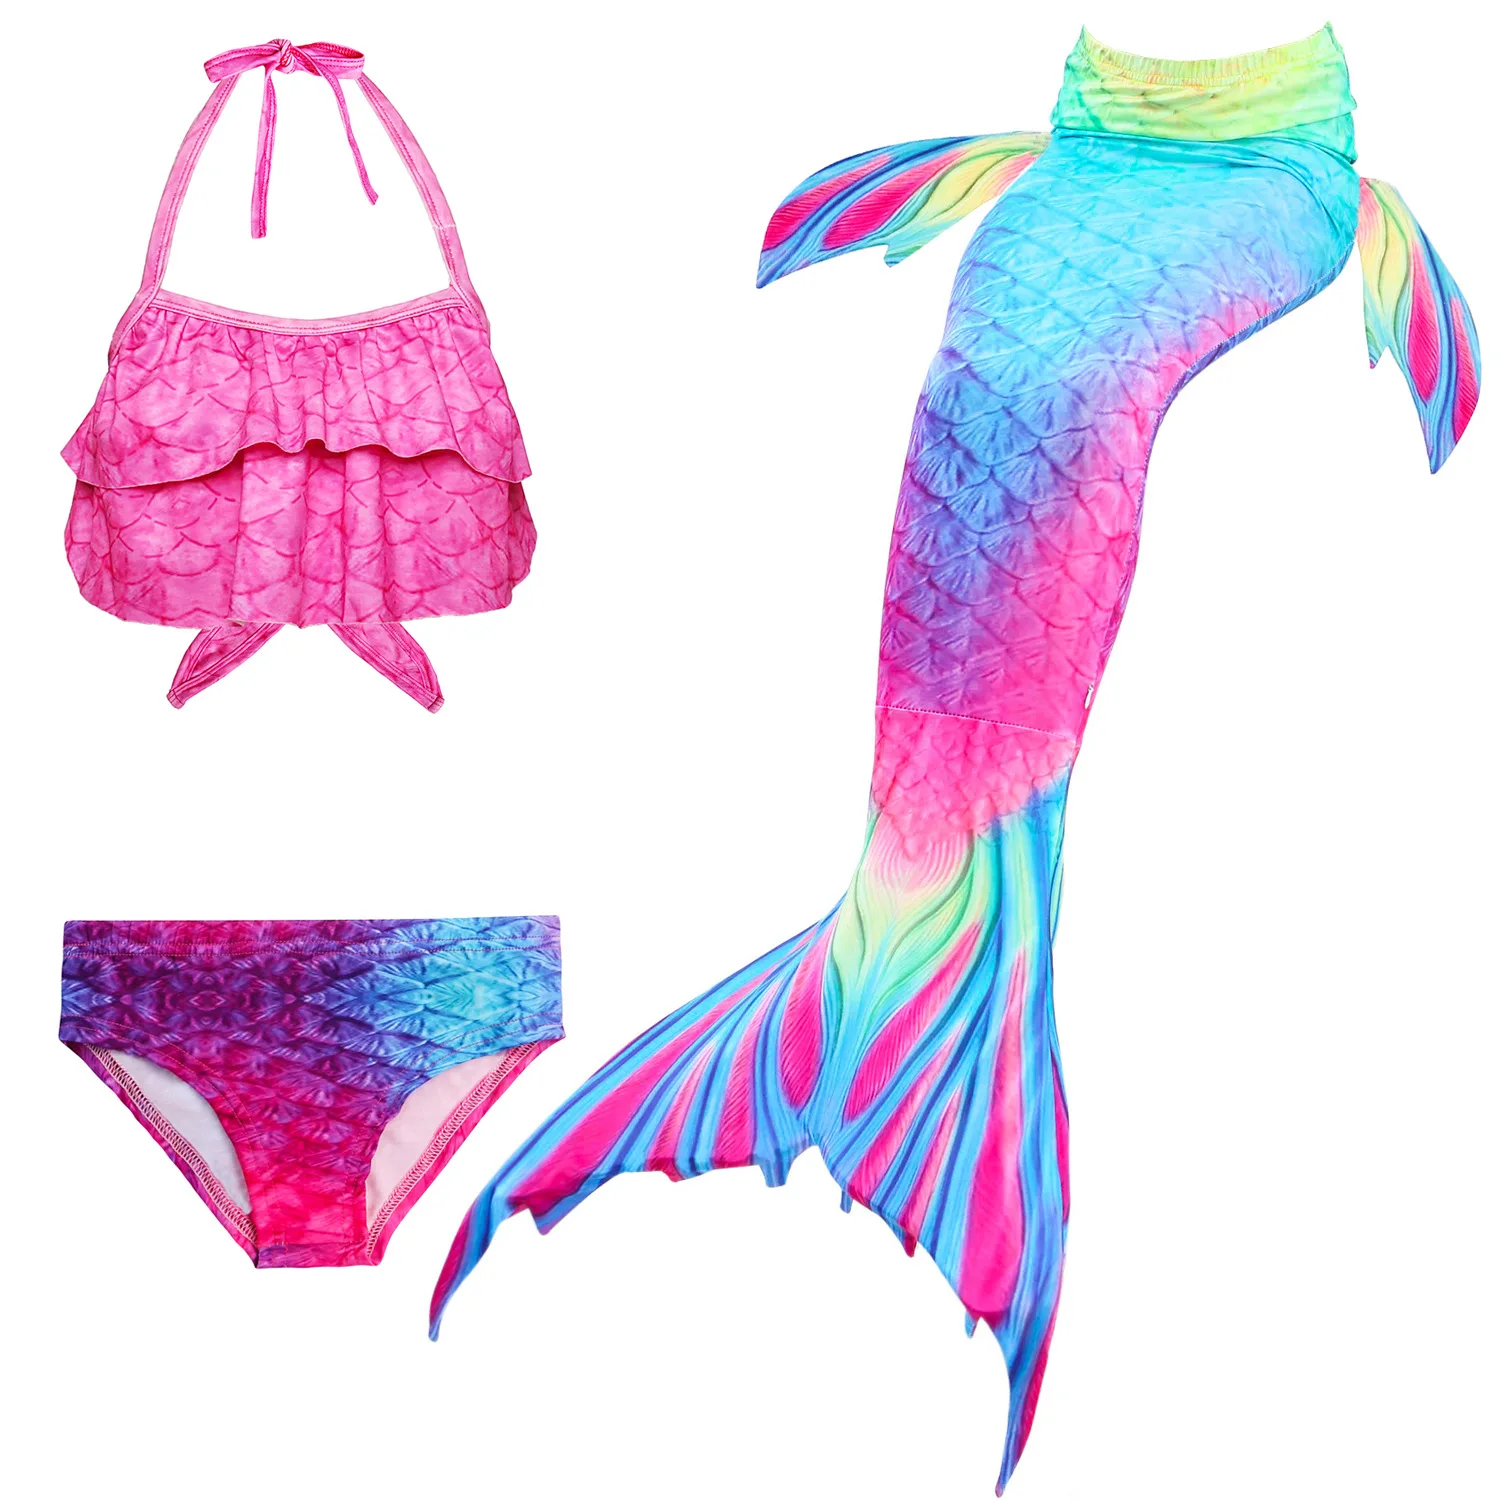 Hot Girls Mermaid Tail With Monofin For Swim Mermaid Swimsuit Mermaid Dress Swimsuit Bikini cosplay costume - Color: DH95 set 5